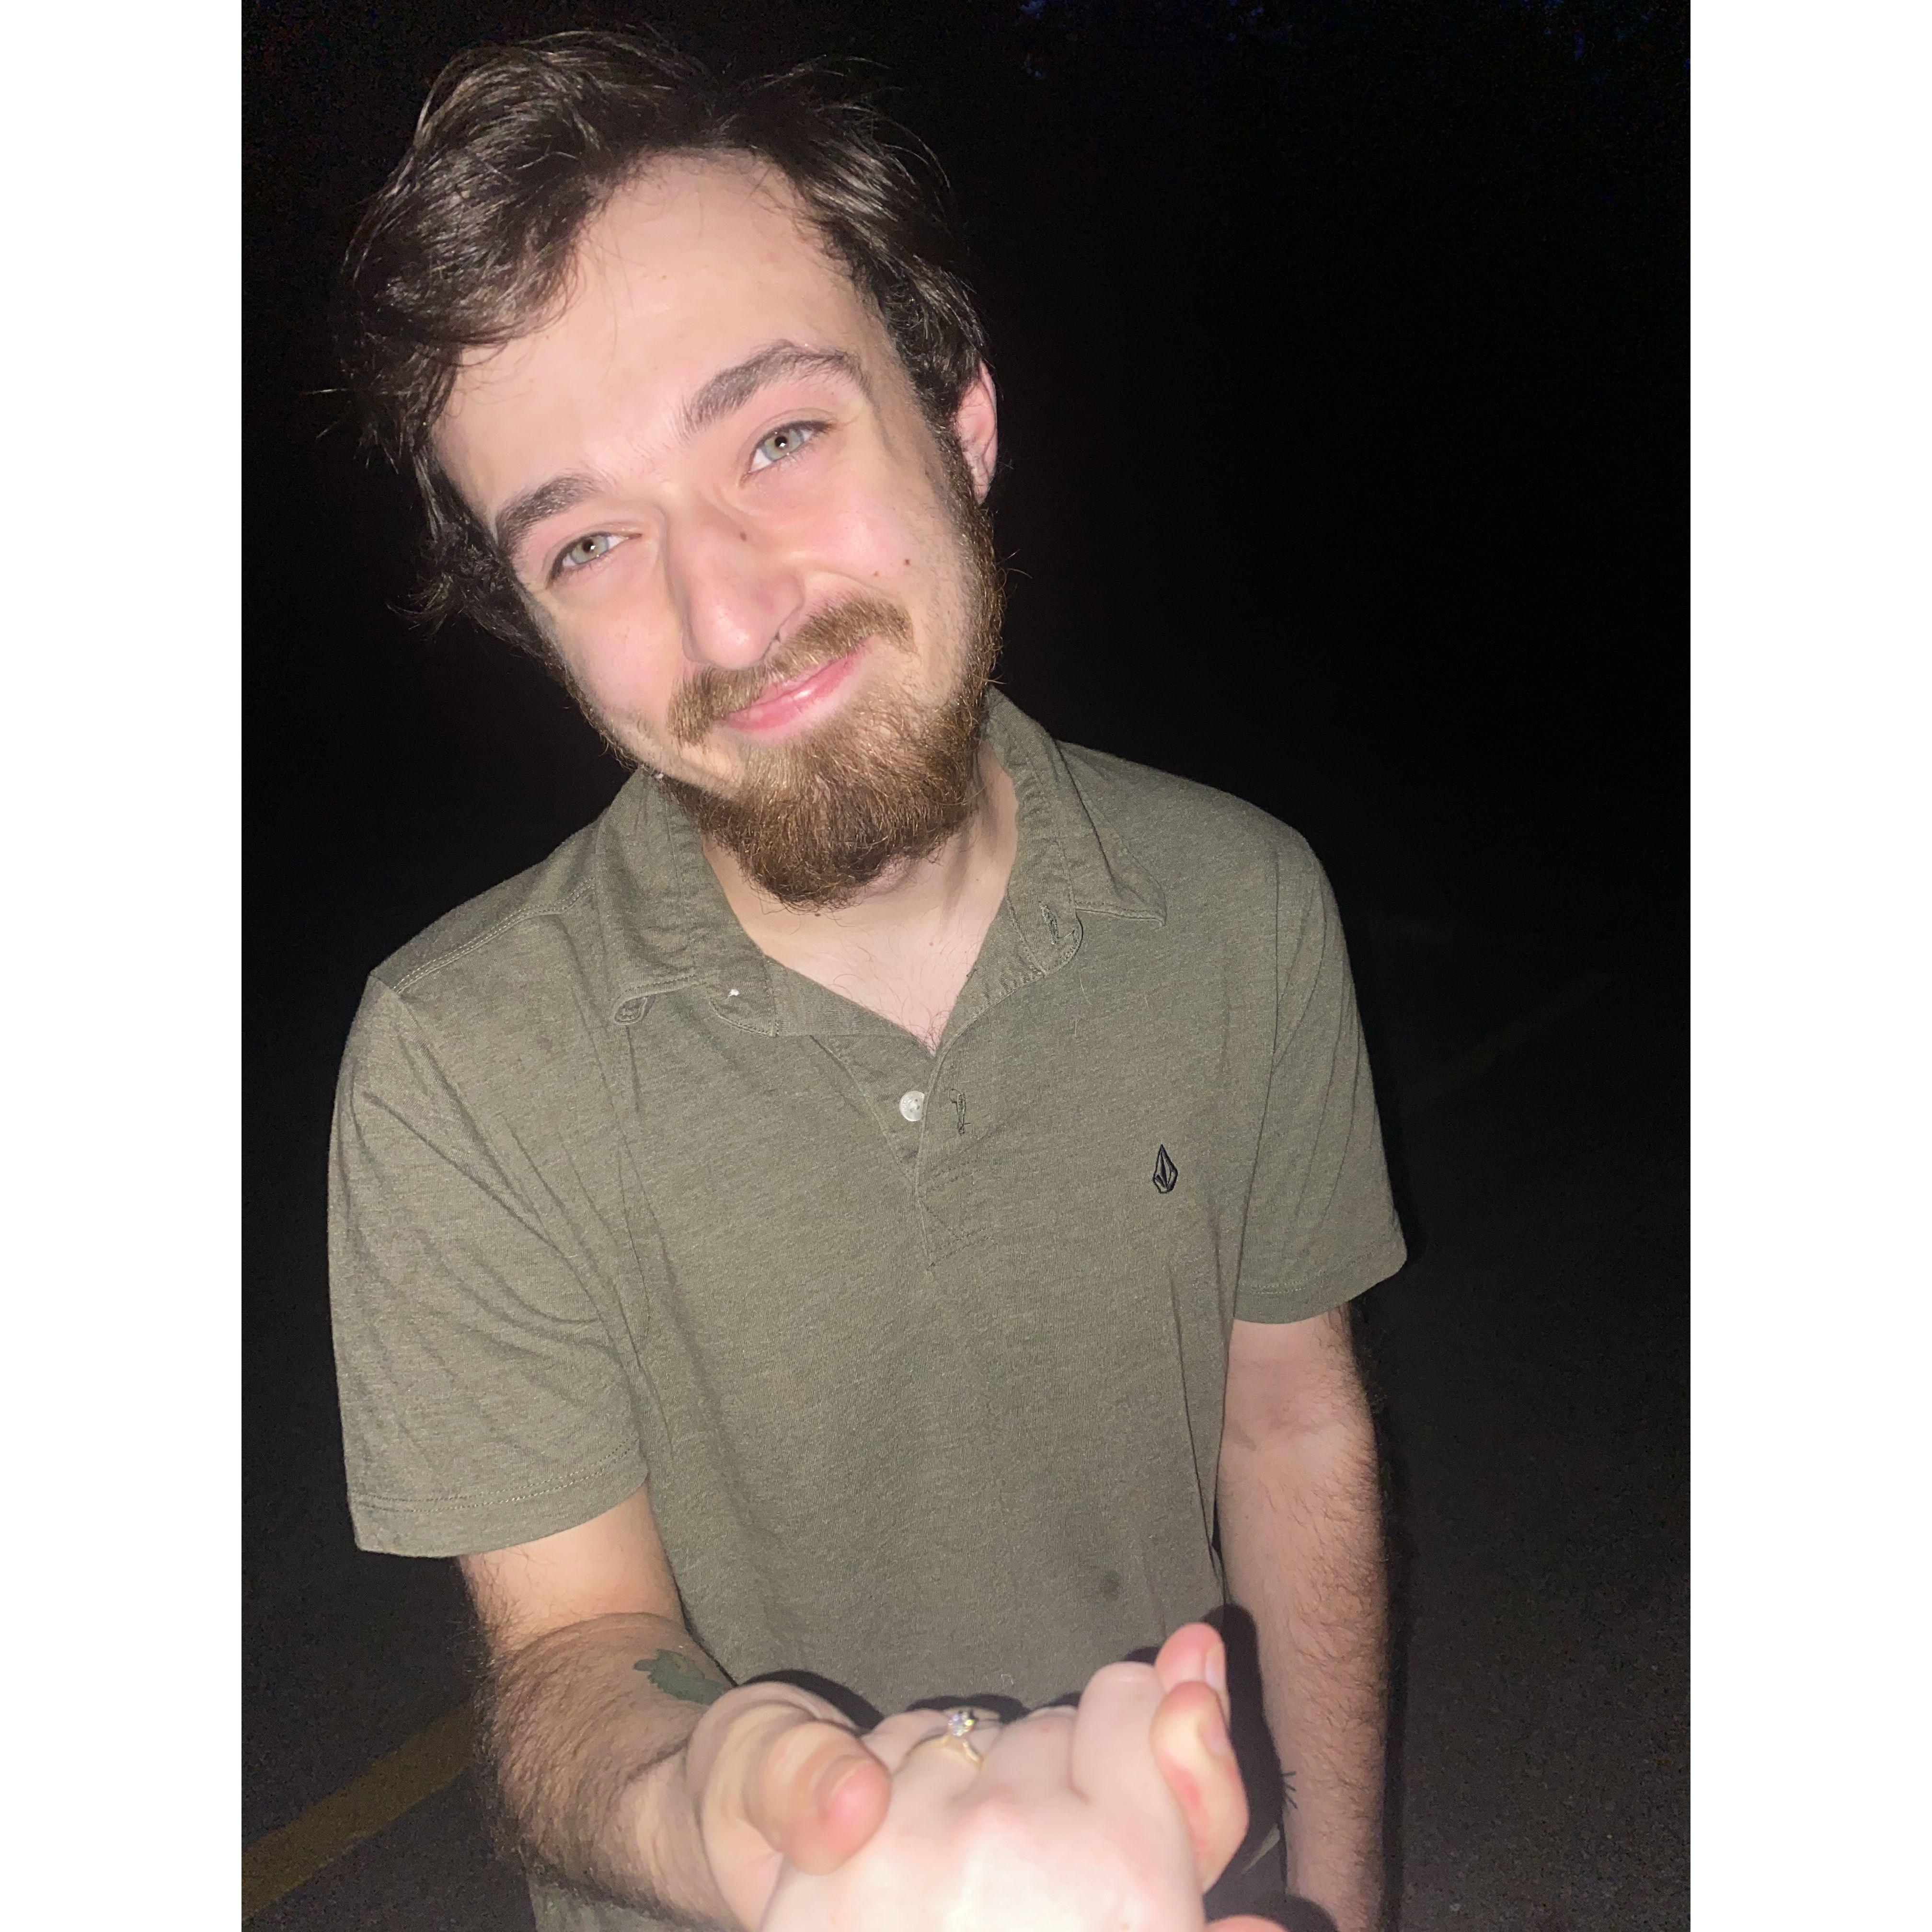 A photo I took of Zach the night we got engaged! August 2022